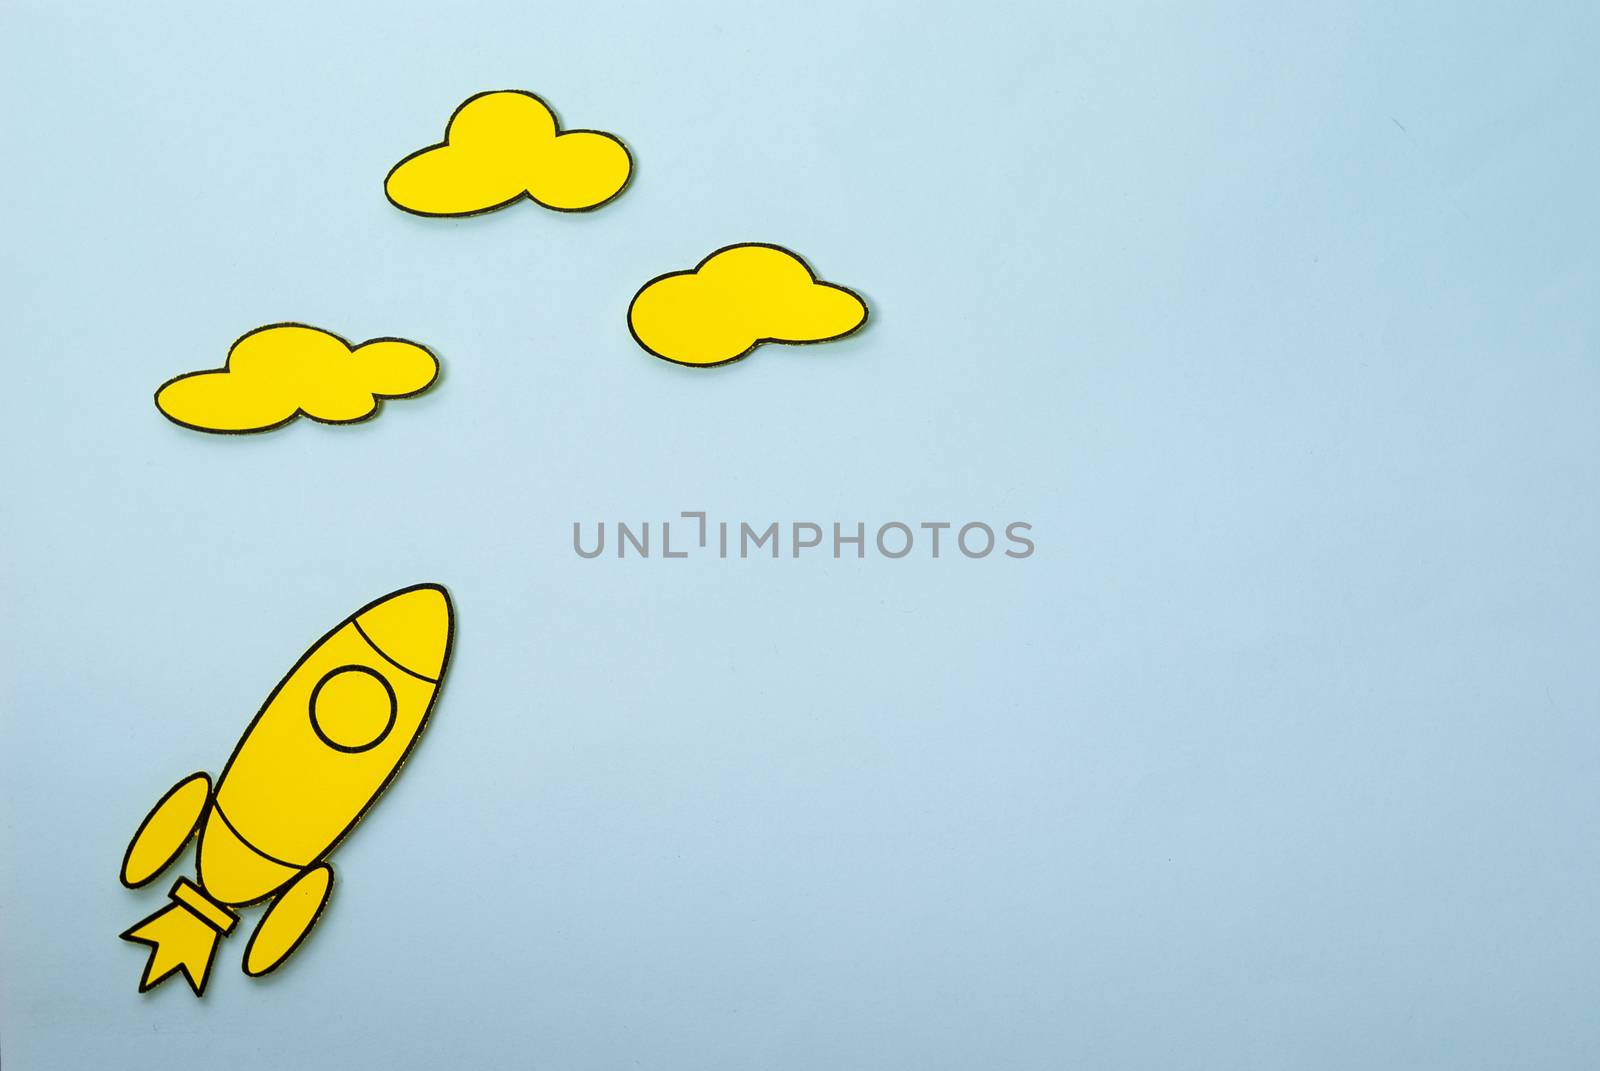 Little yellow rocket flying high aiming for clouds by sergii_gnatiuk